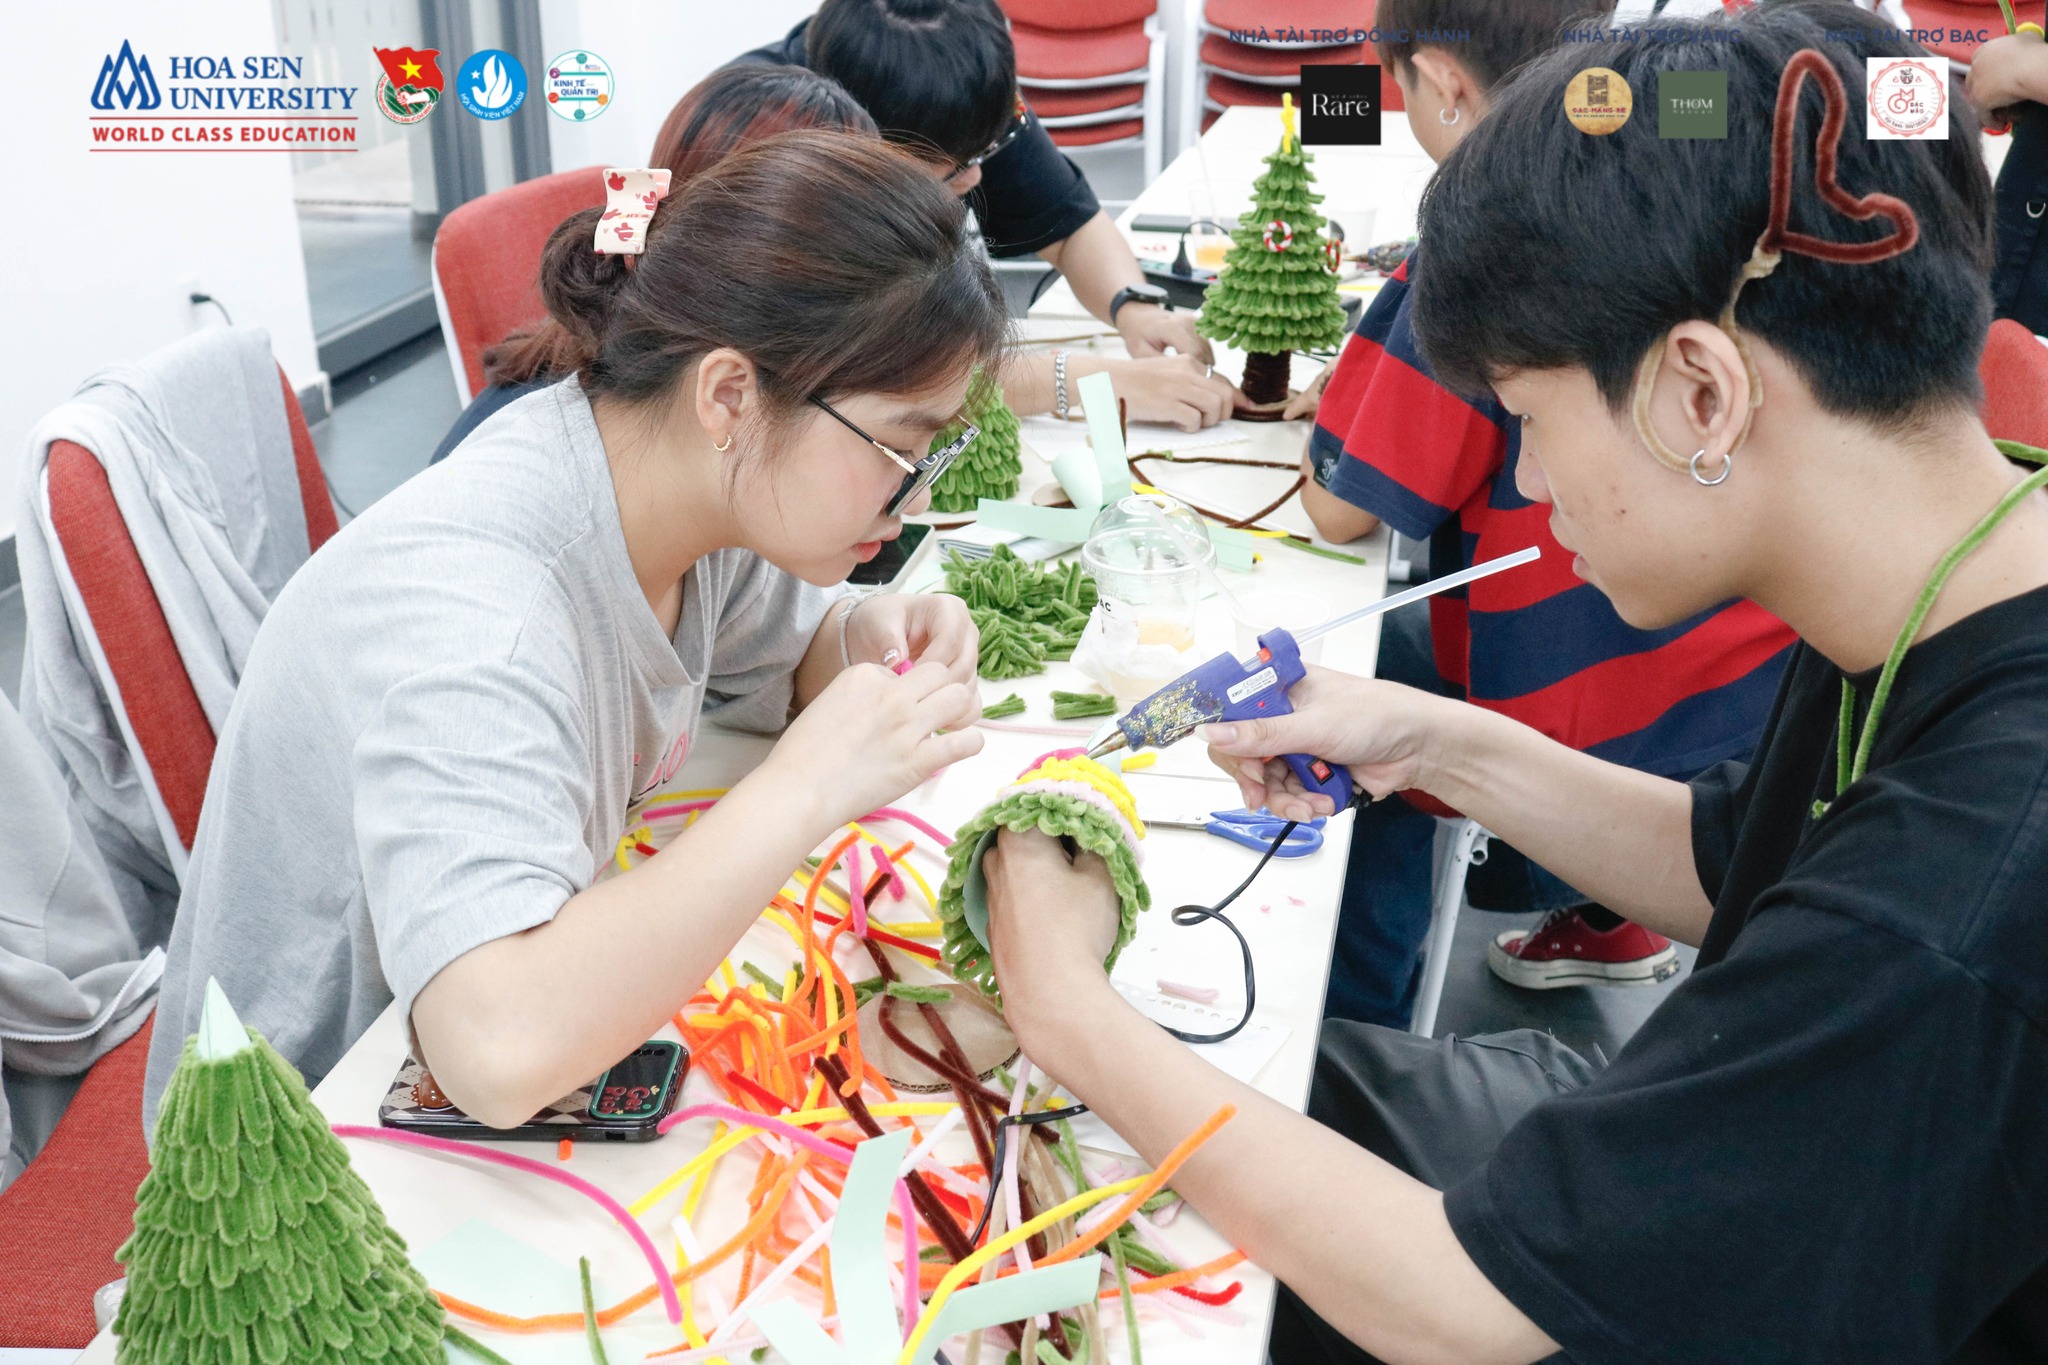 409716811 688238110078078 9089675028357476496 n A series of warm Christmas activities of HSU students